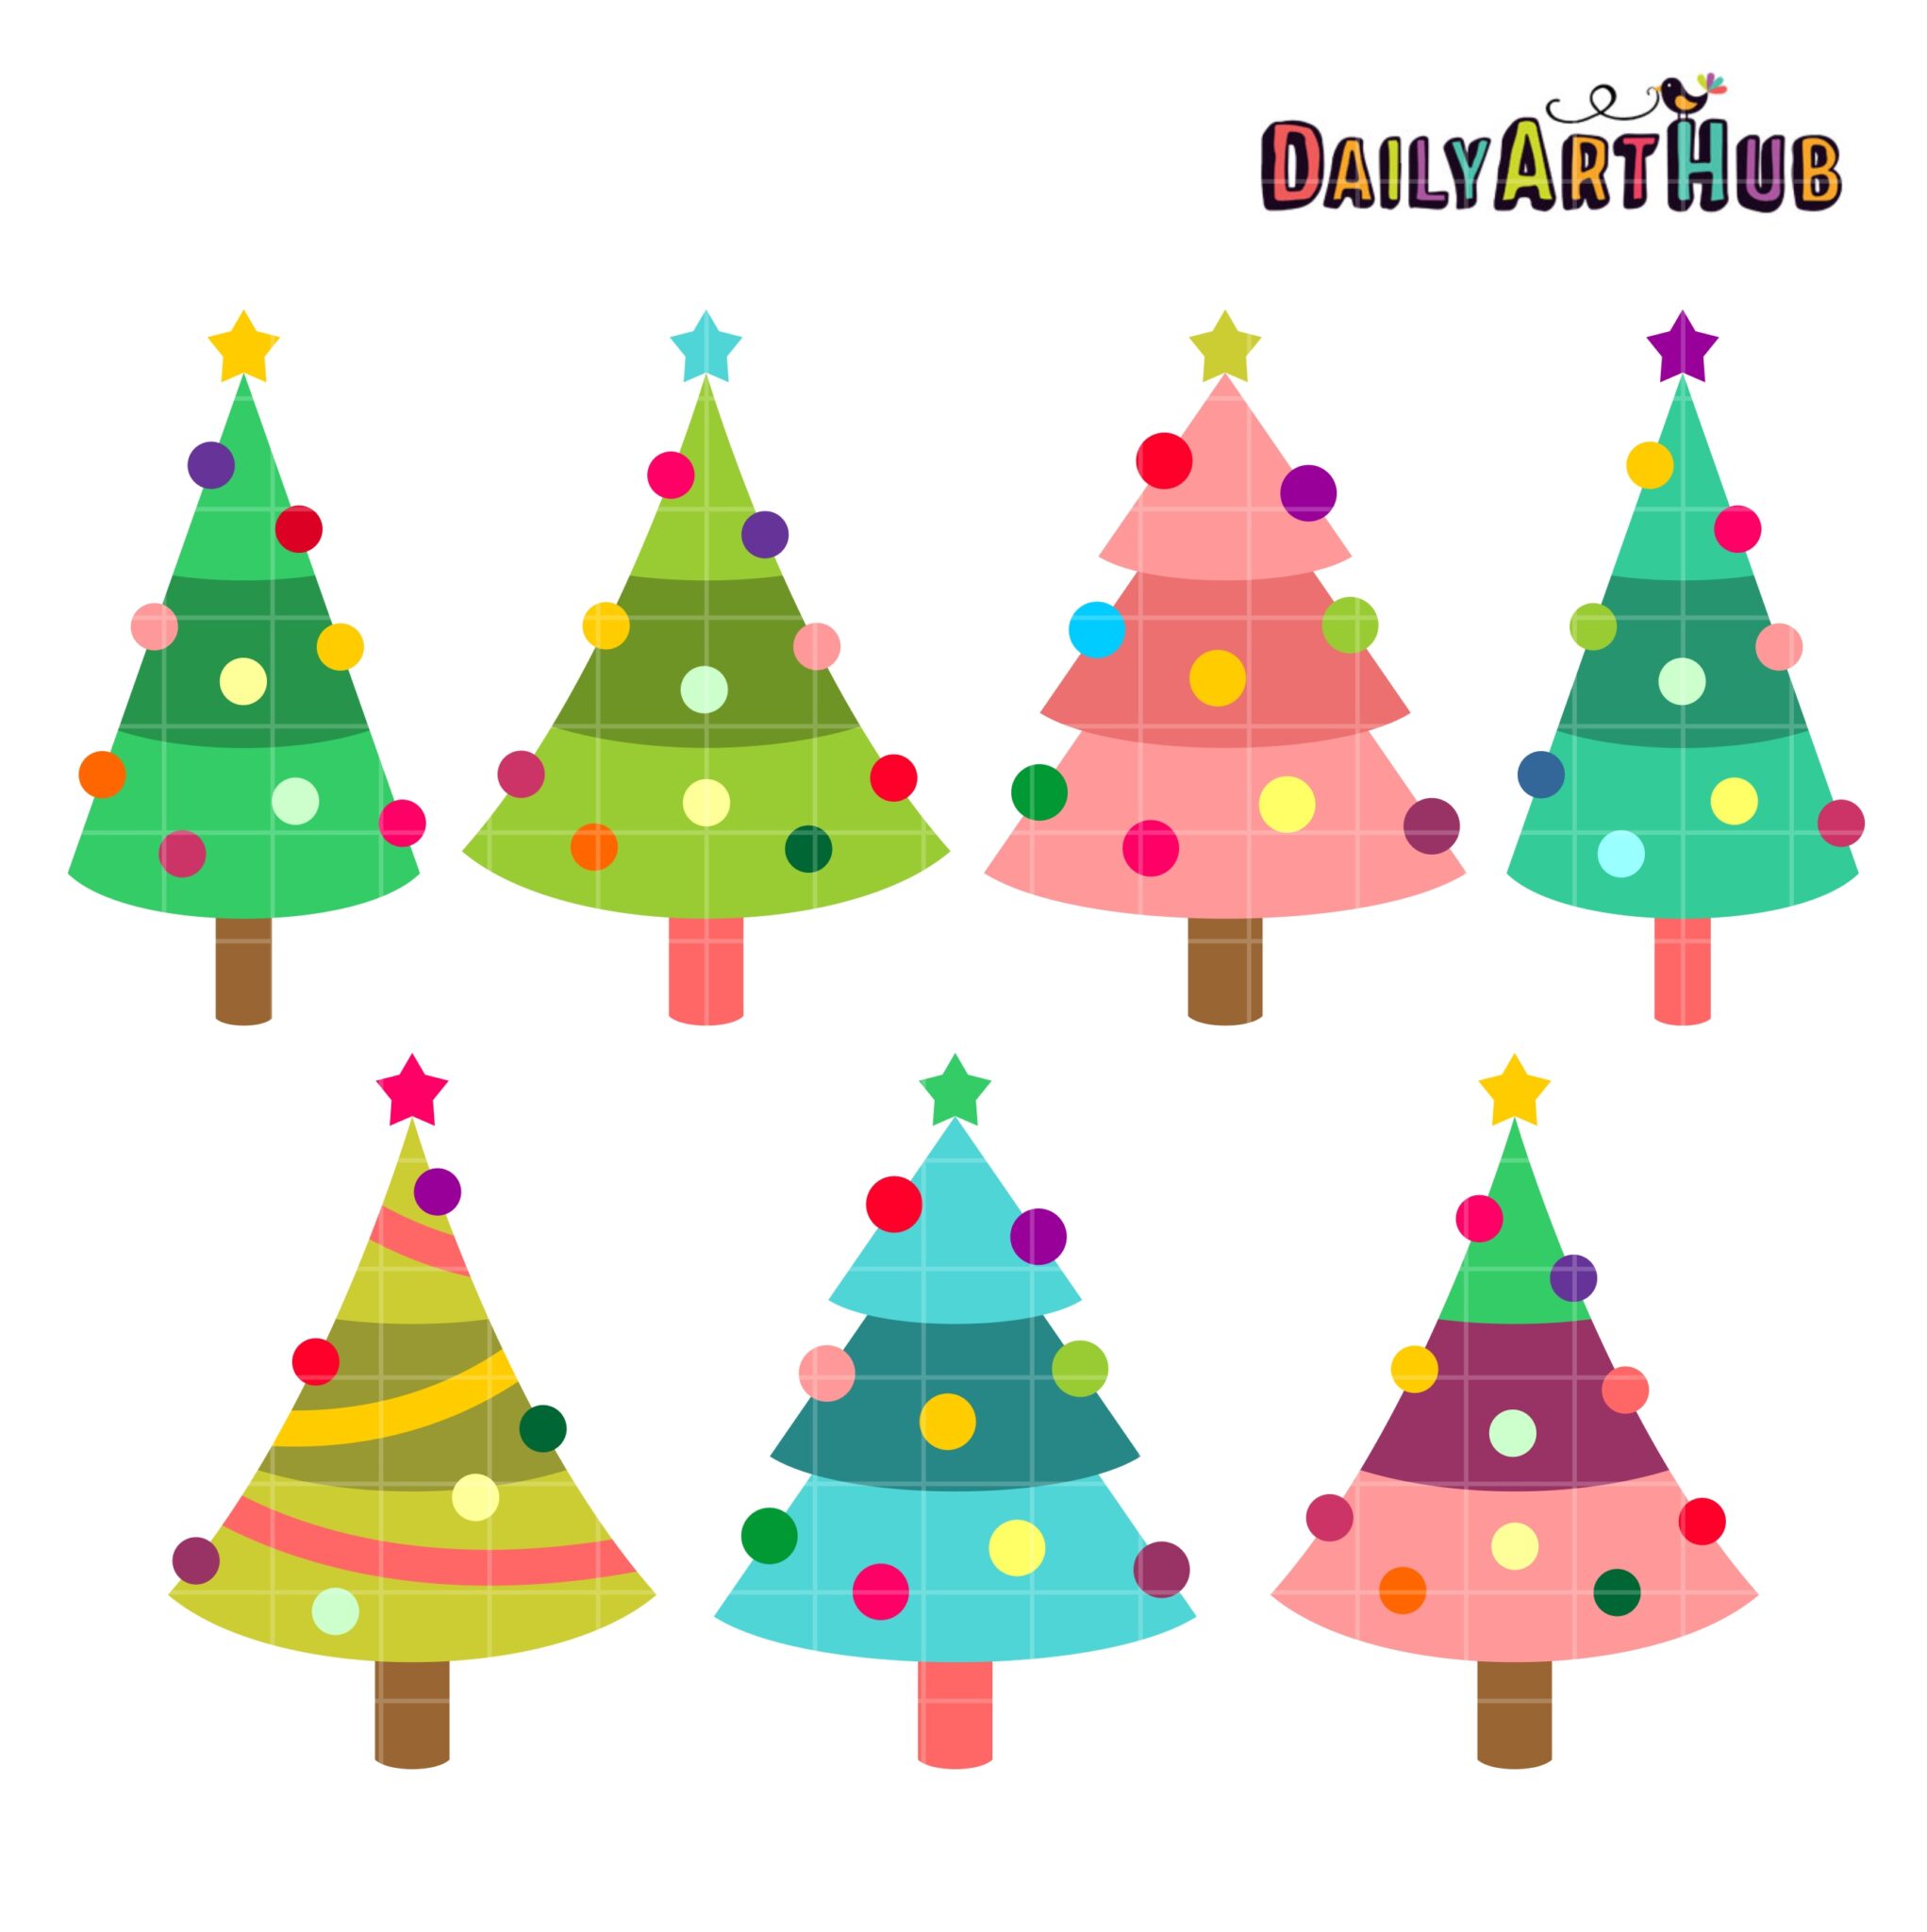 christmas trees decorated clip art